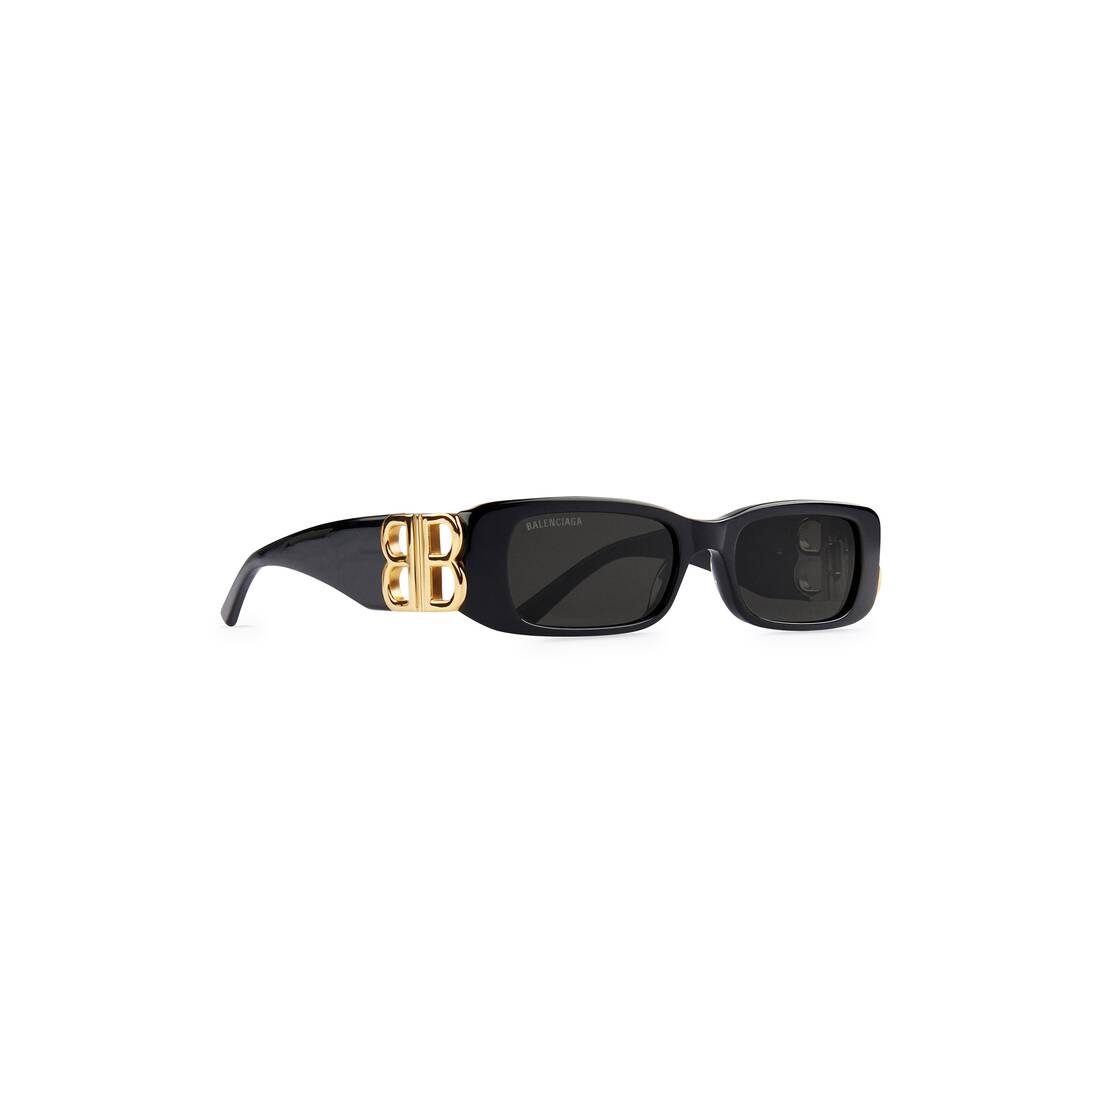 Dynasty Rectangle Sunglasses in Black